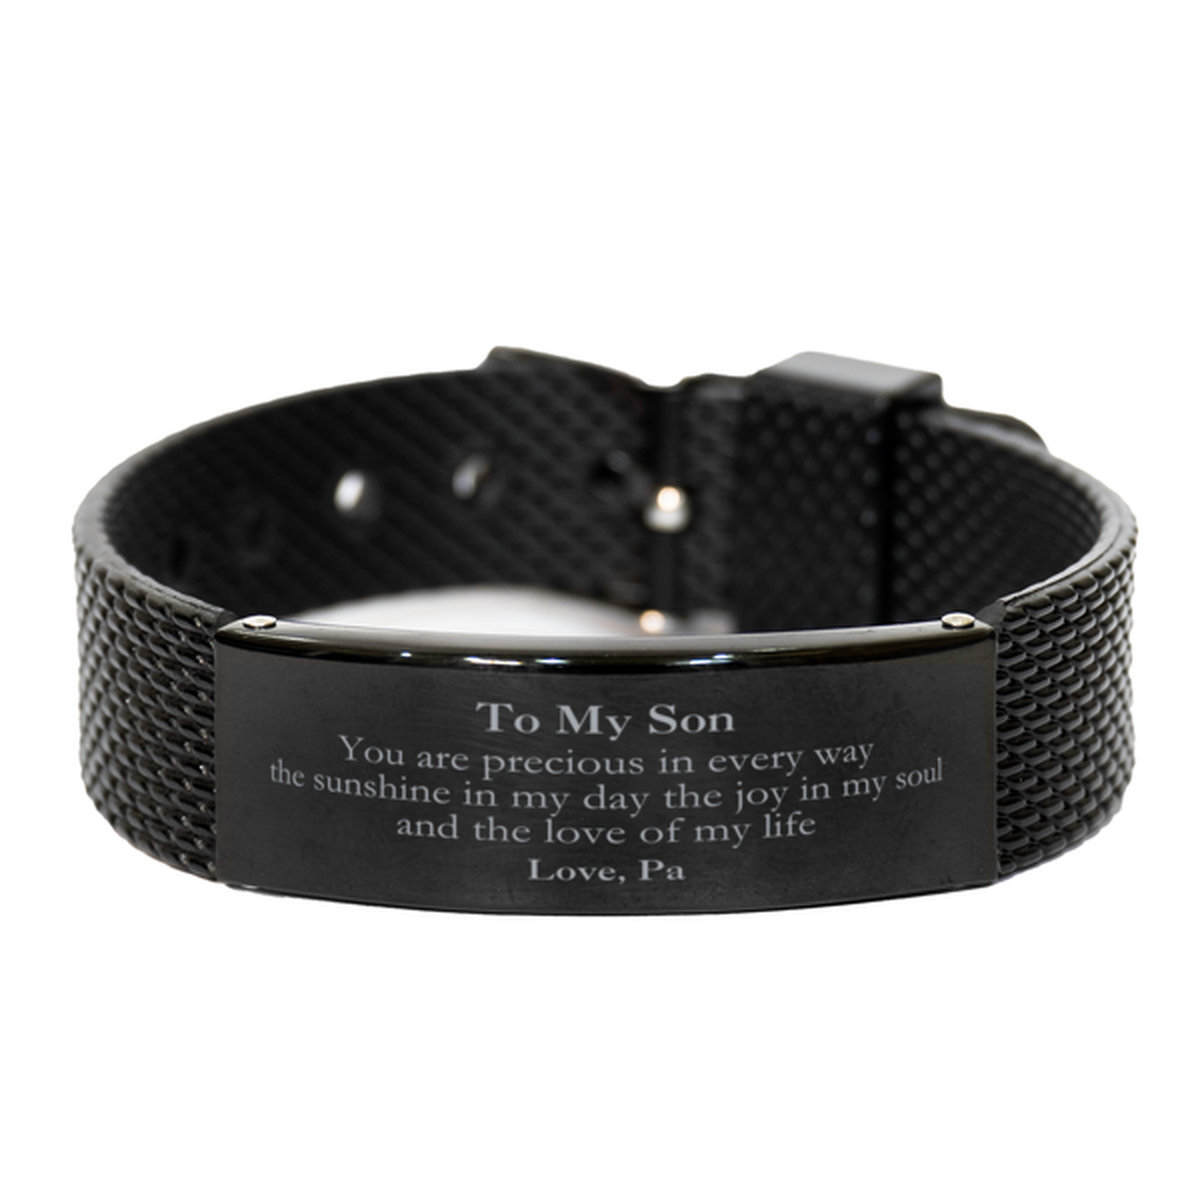 Graduation Gifts for Son Black Shark Mesh Bracelet Present from Pa, Christmas Son Birthday Gifts Son You are precious in every way the sunshine in my day. Love, Pa